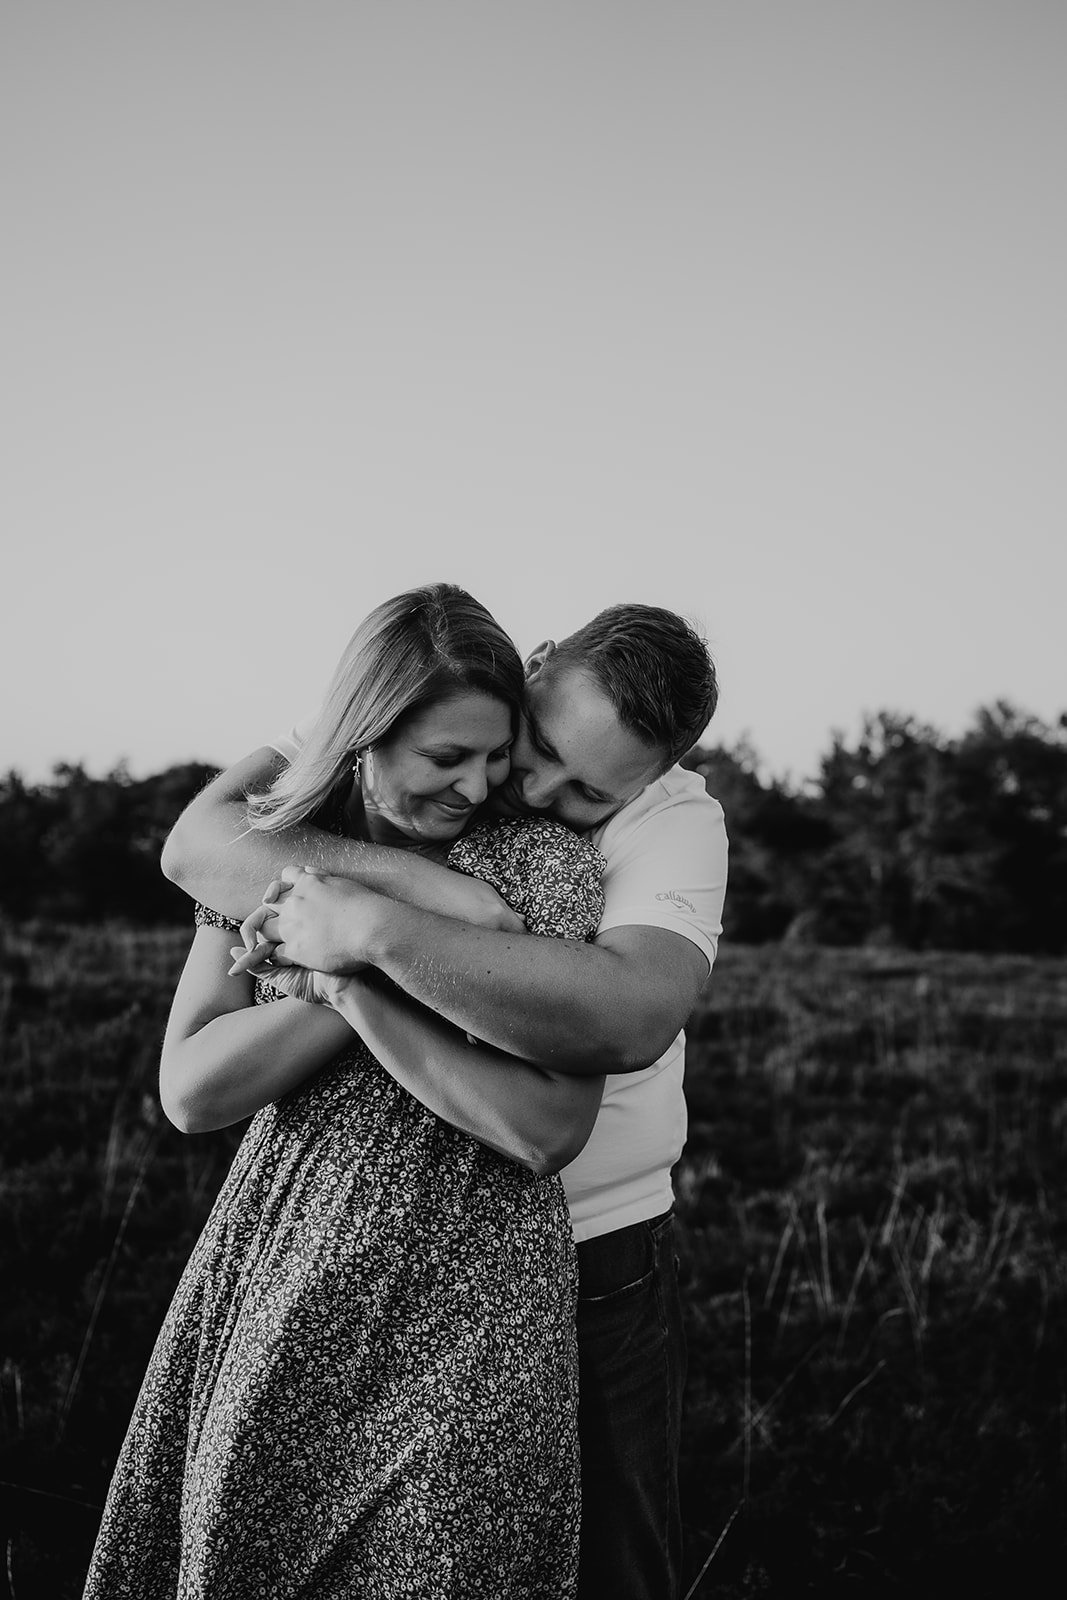 Black and white photo of a man stood behind his fiancée with his arms wrapped around her in a hug